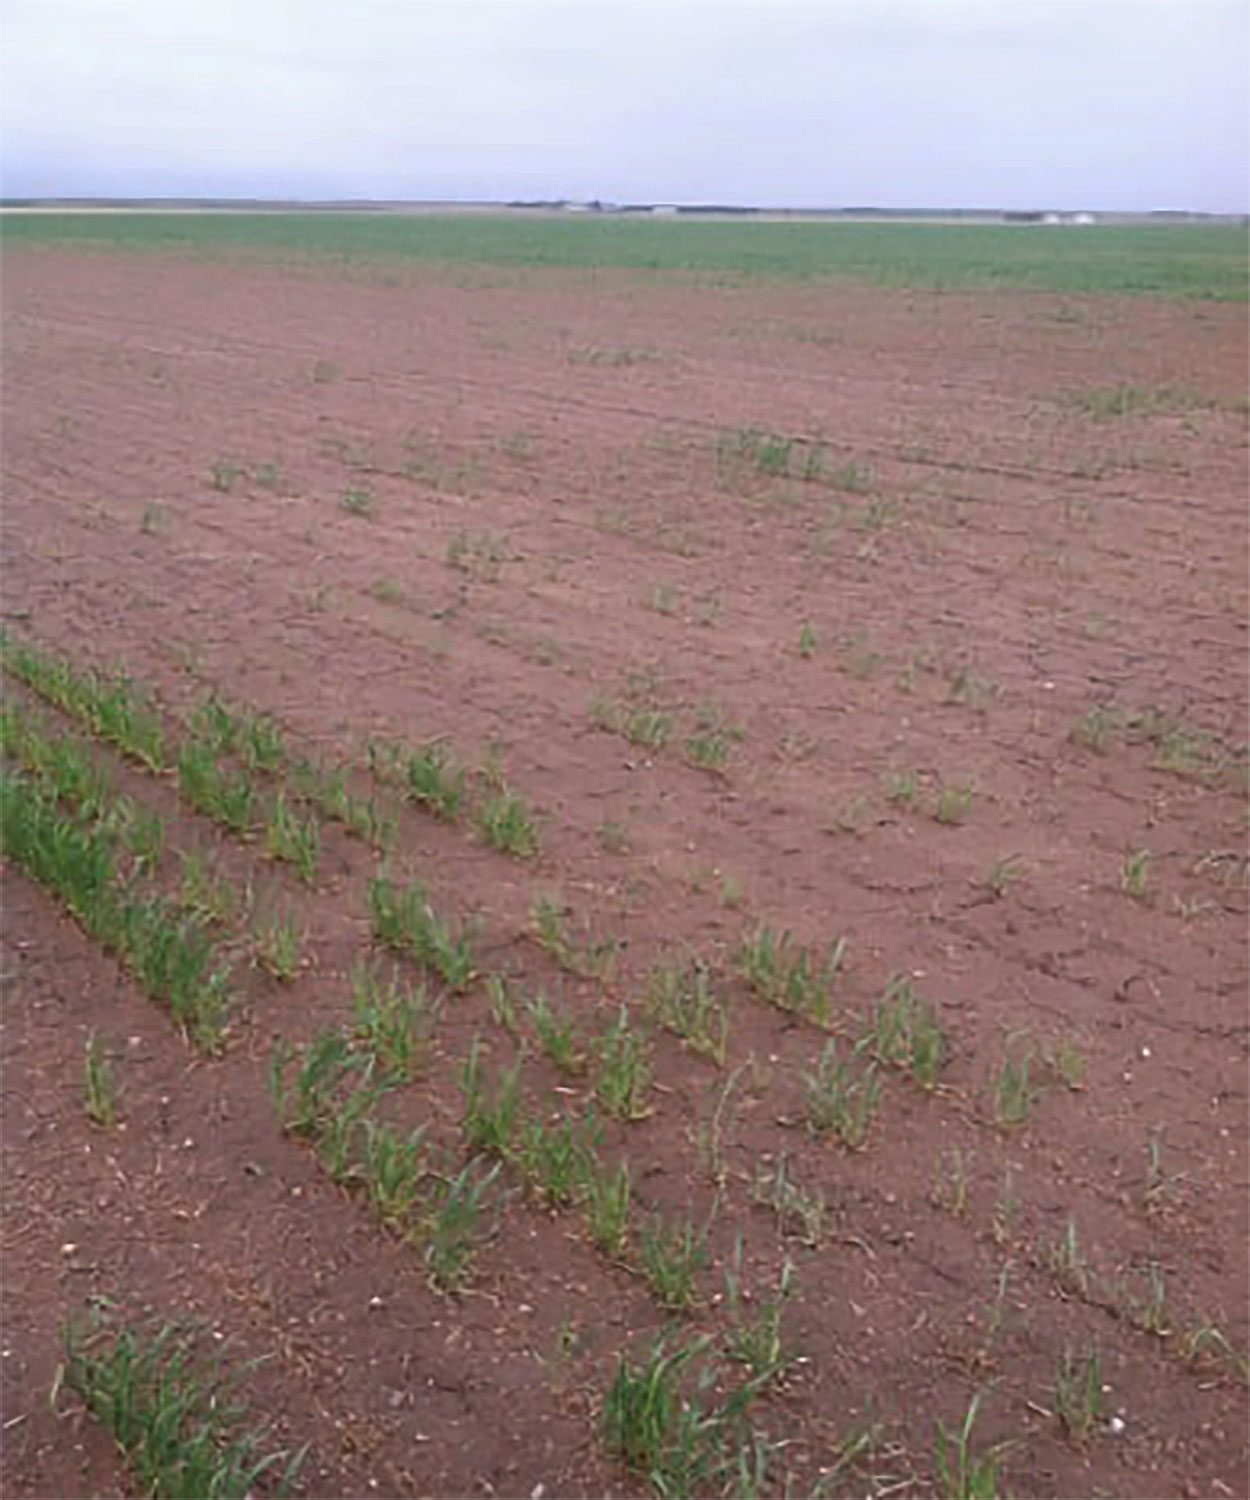 Wheat field with poor stand emergence.